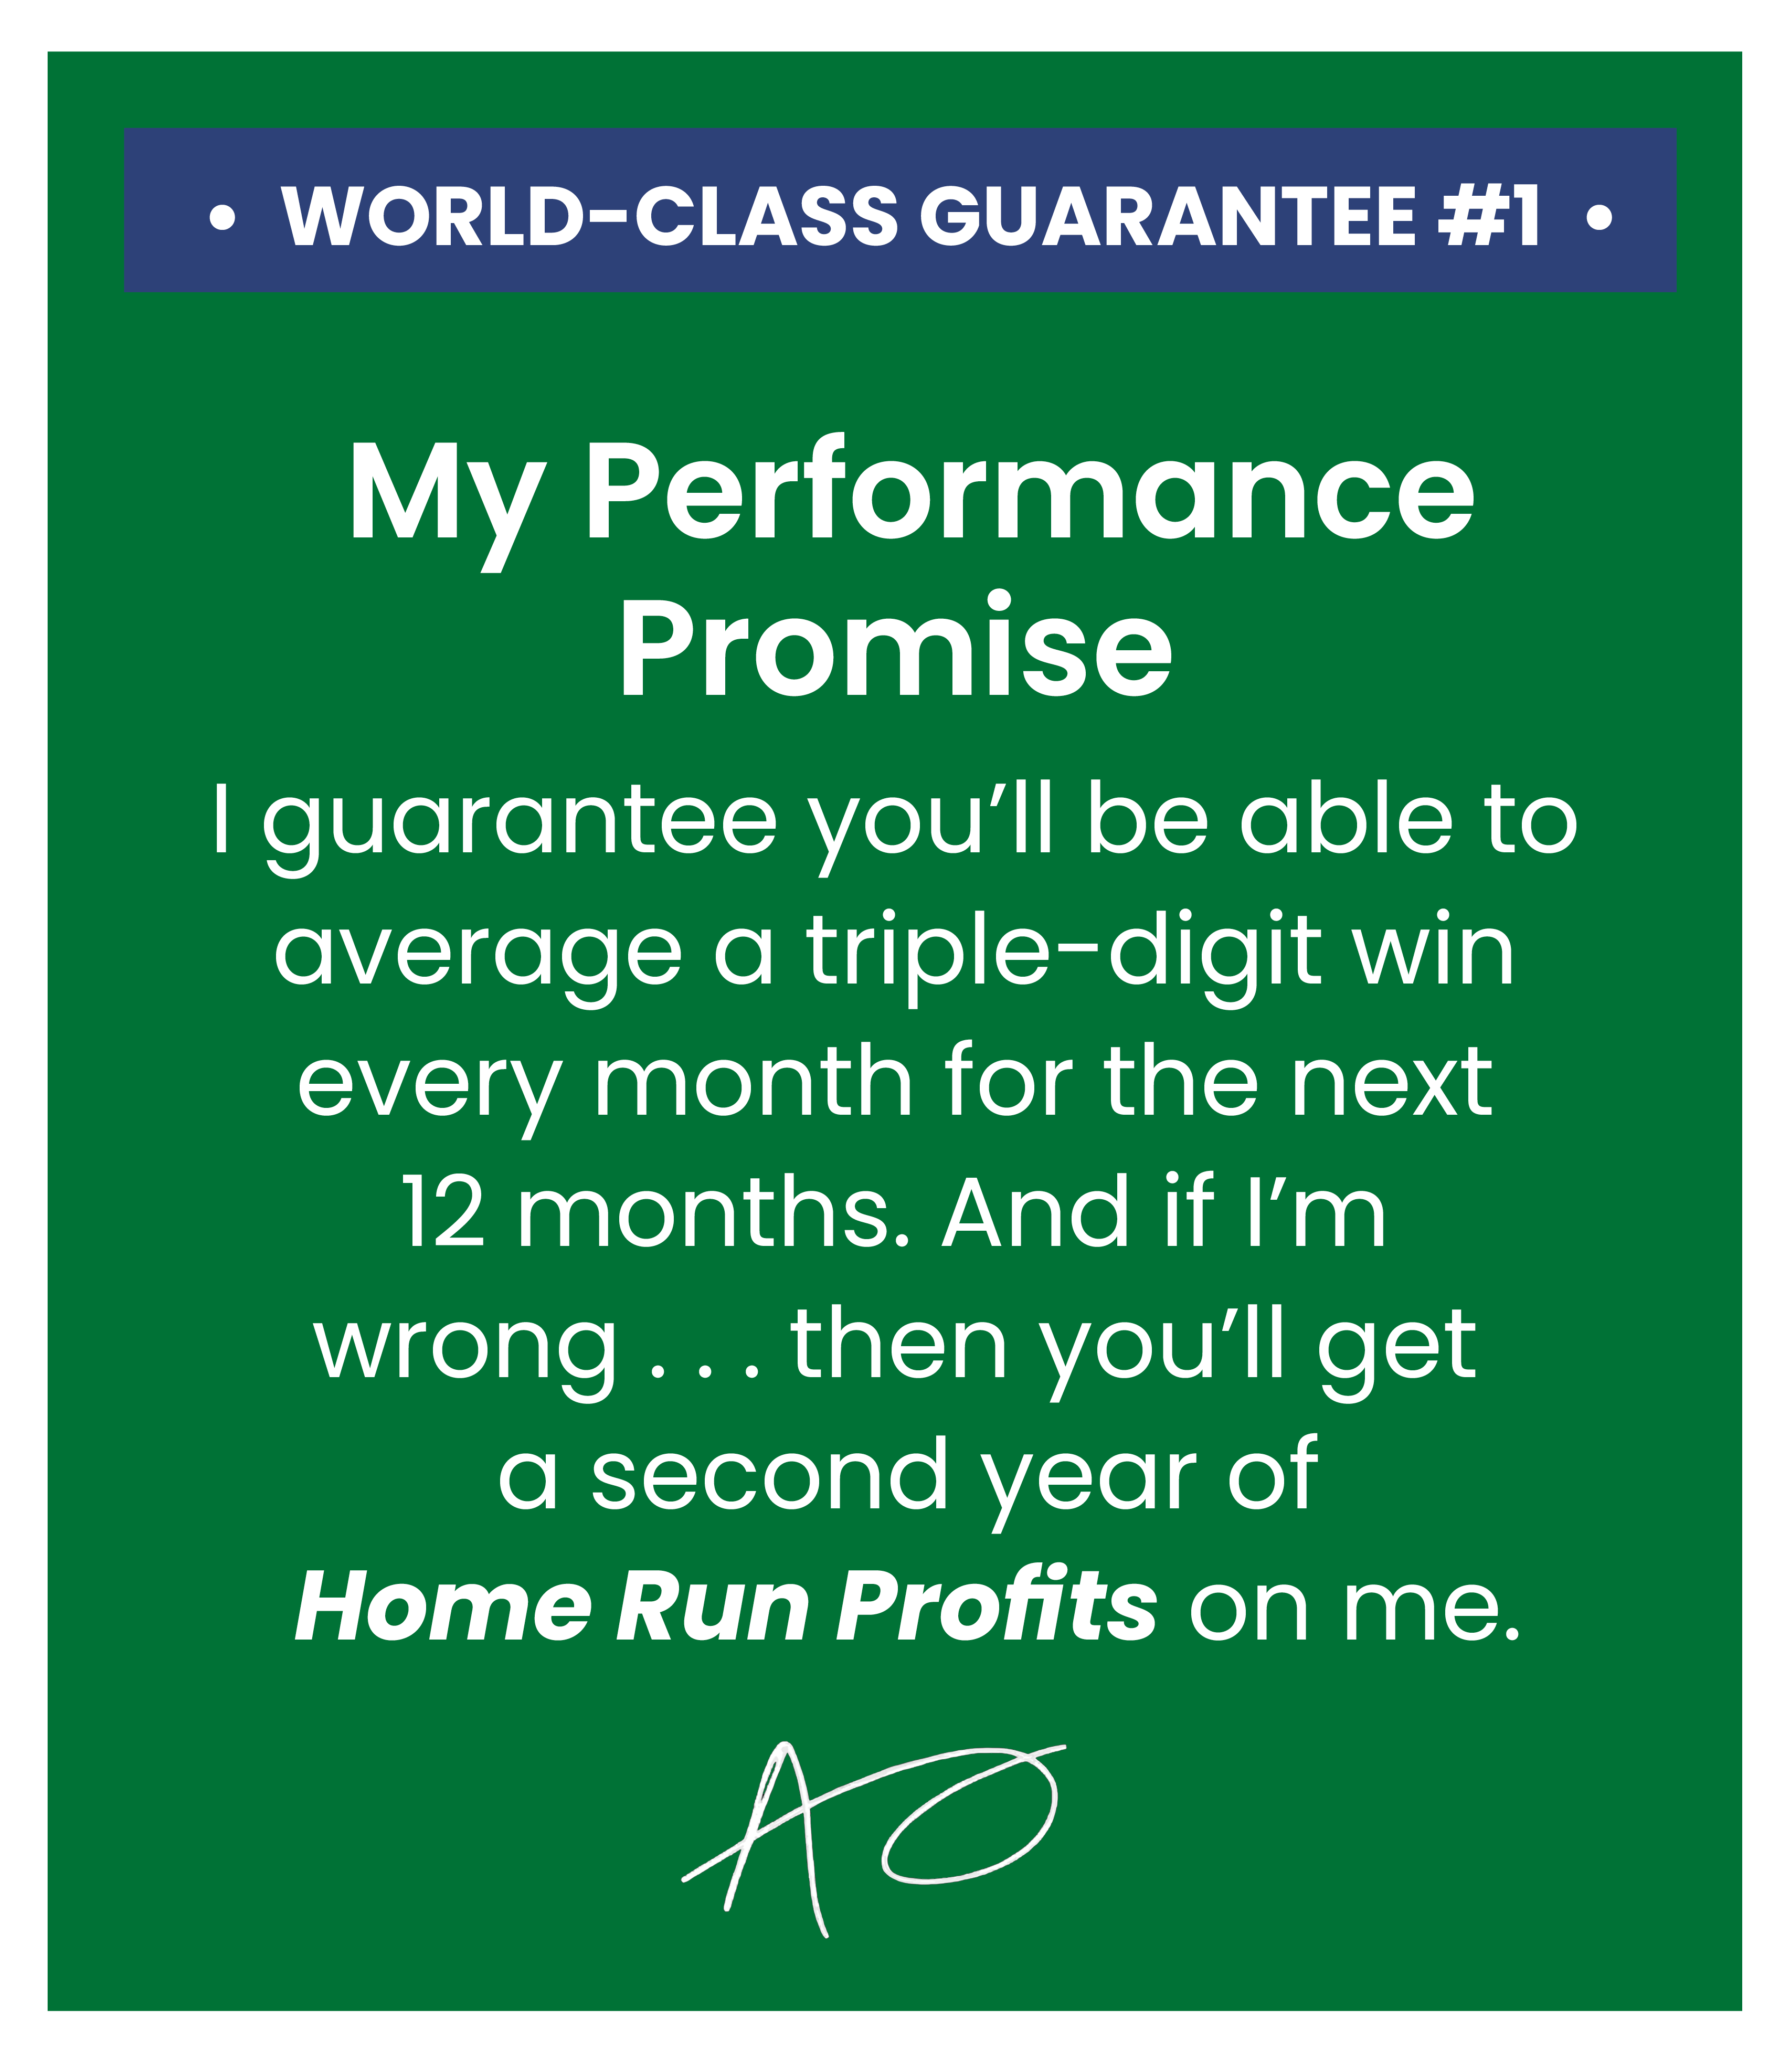 Adam's performance guarantee of a triple-digit win a month for 12 months or your second year is FREE.